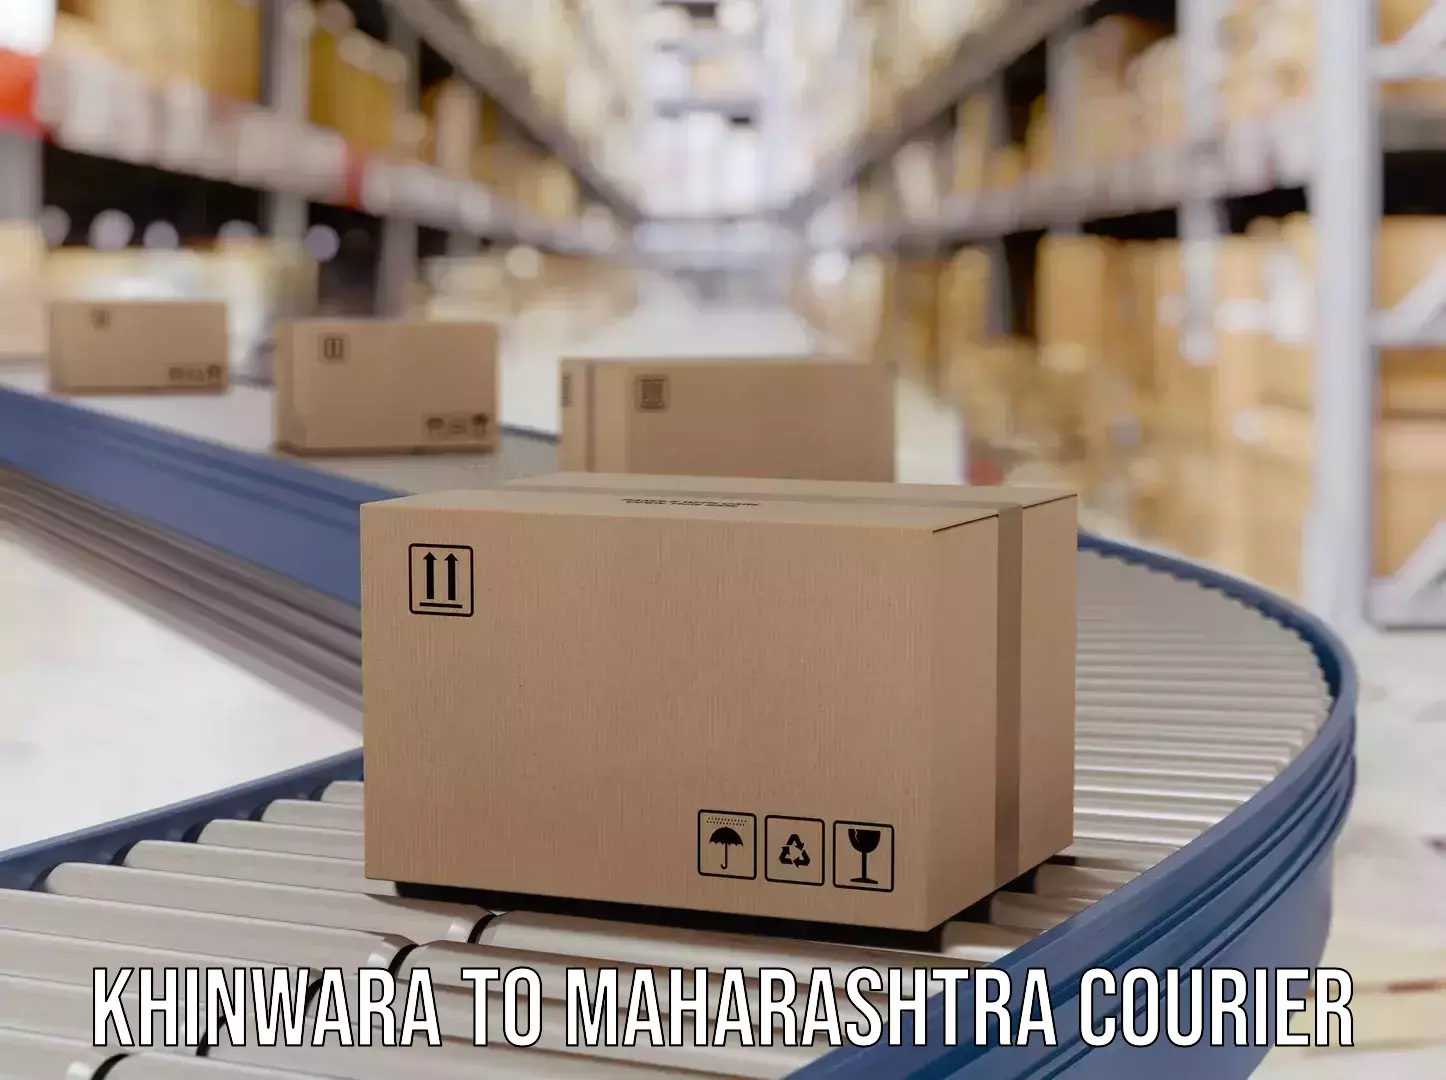 State-of-the-art courier technology Khinwara to Talere